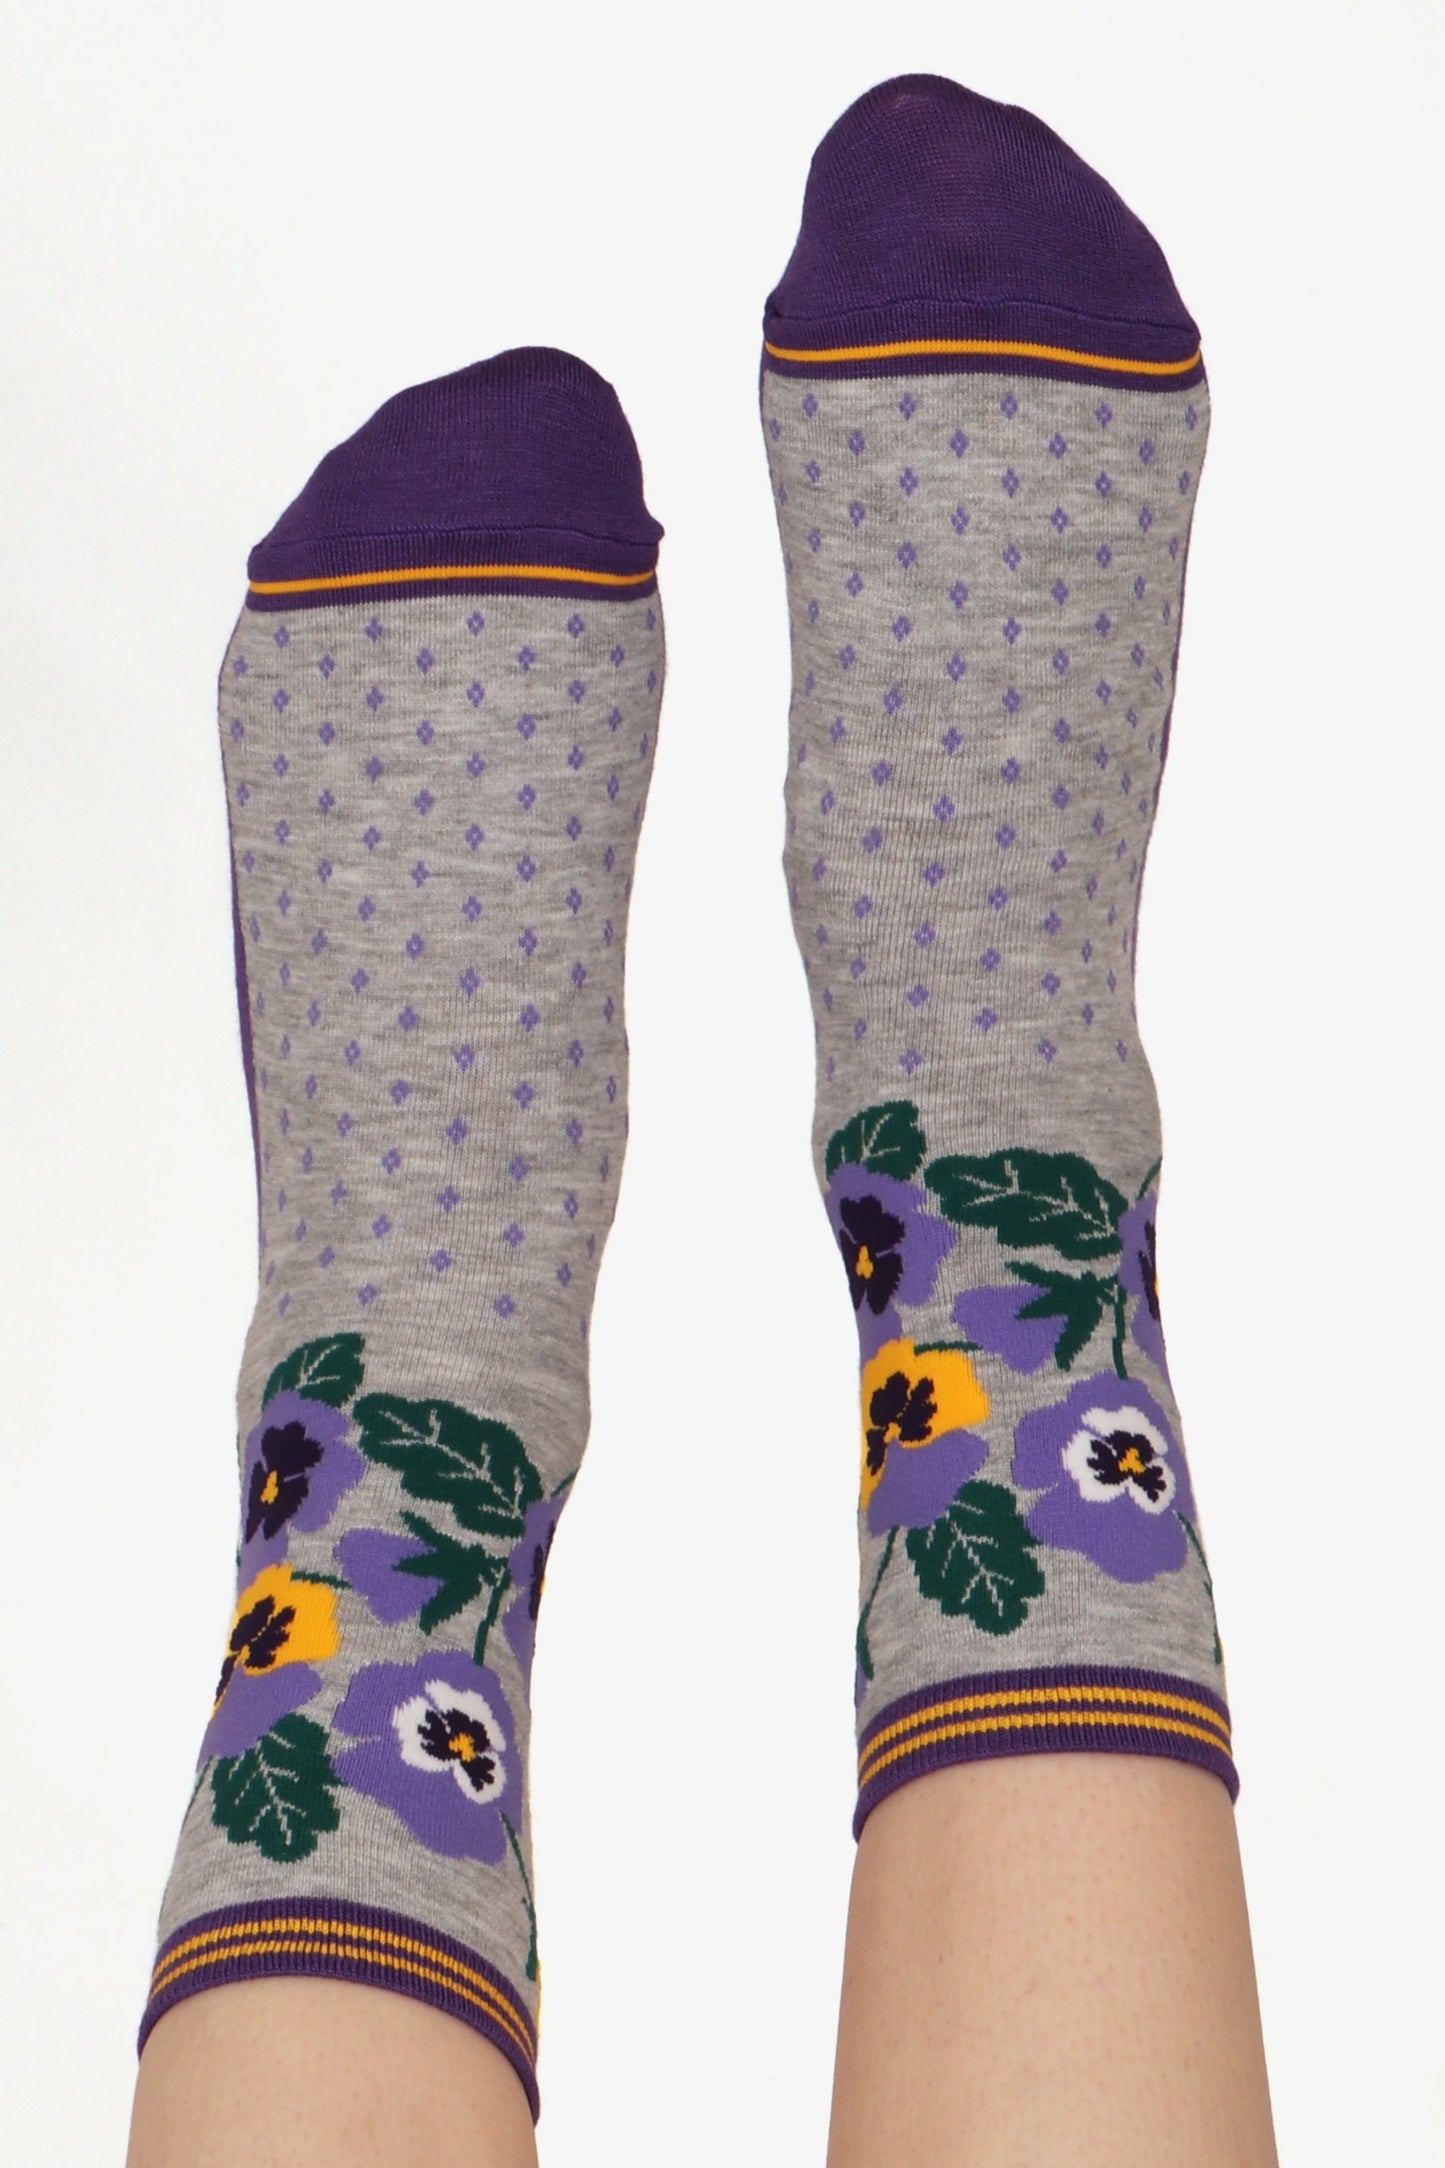 Ladies feet posed straight in the air. Image shows floral pansy print on bamboo fibre socks. Purple toe detail highlighted